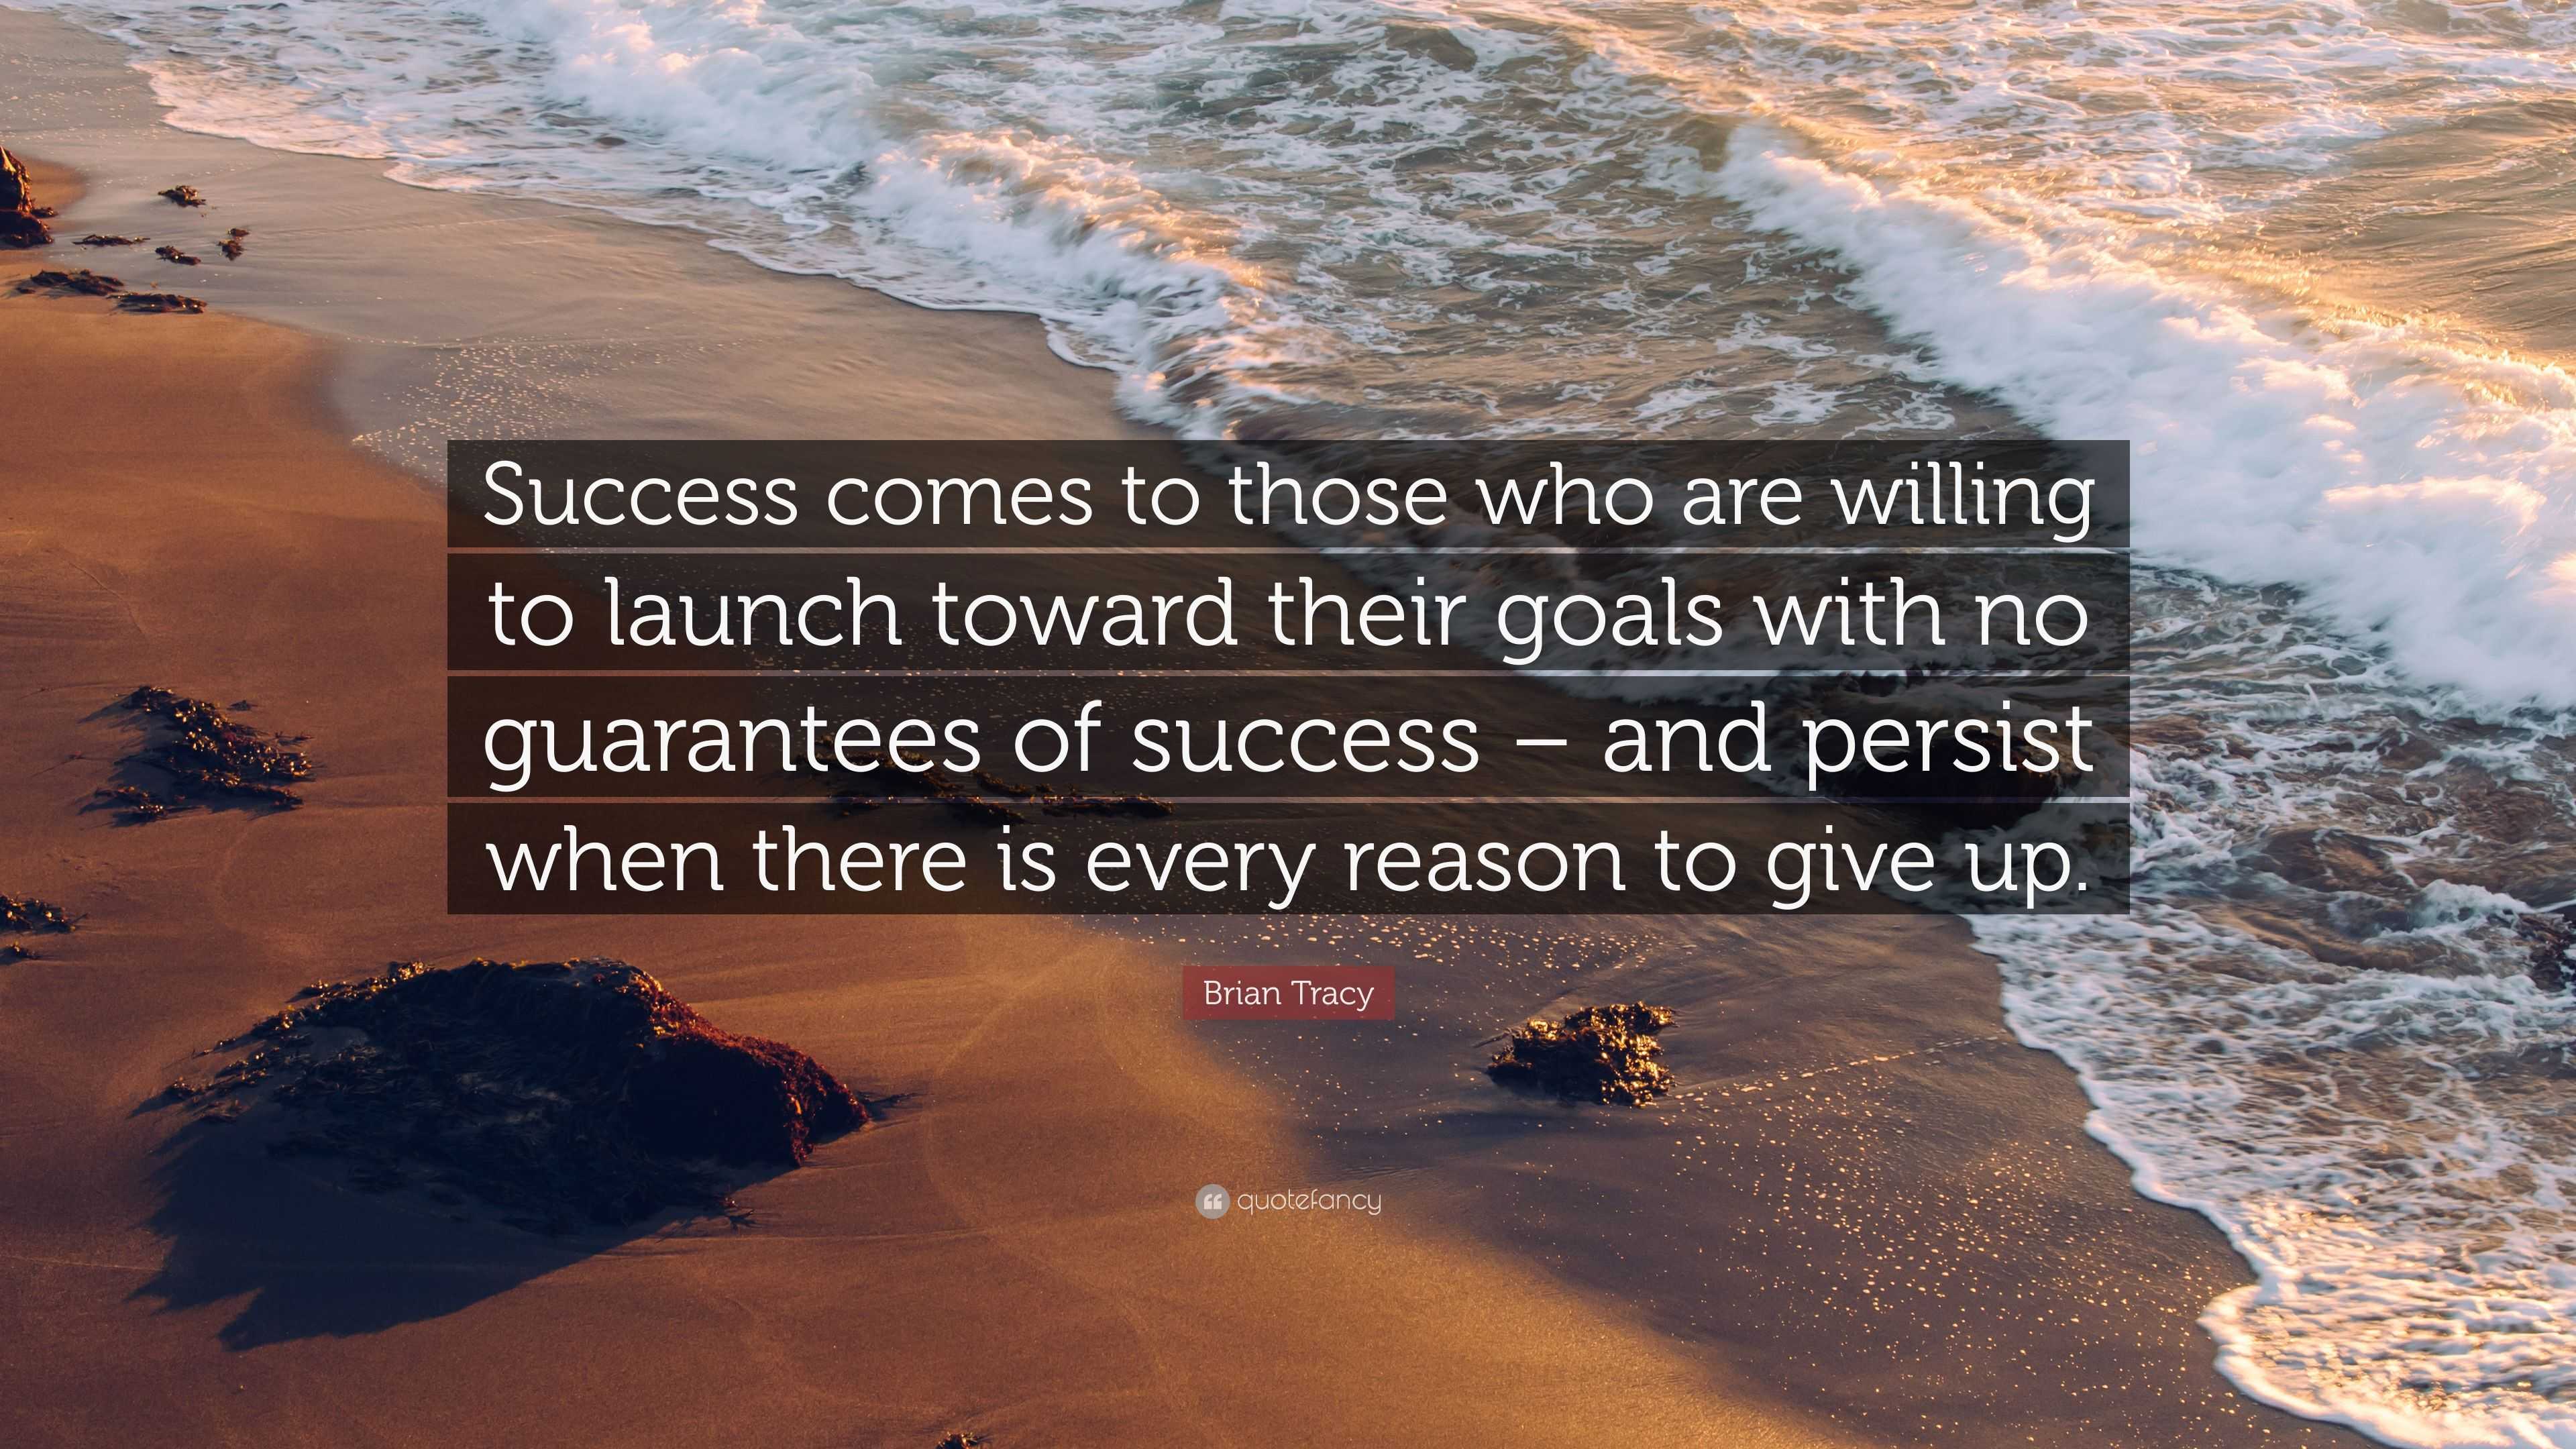 Brian Tracy Quote “success Comes To Those Who Are Willing To Launch Toward Their Goals With No